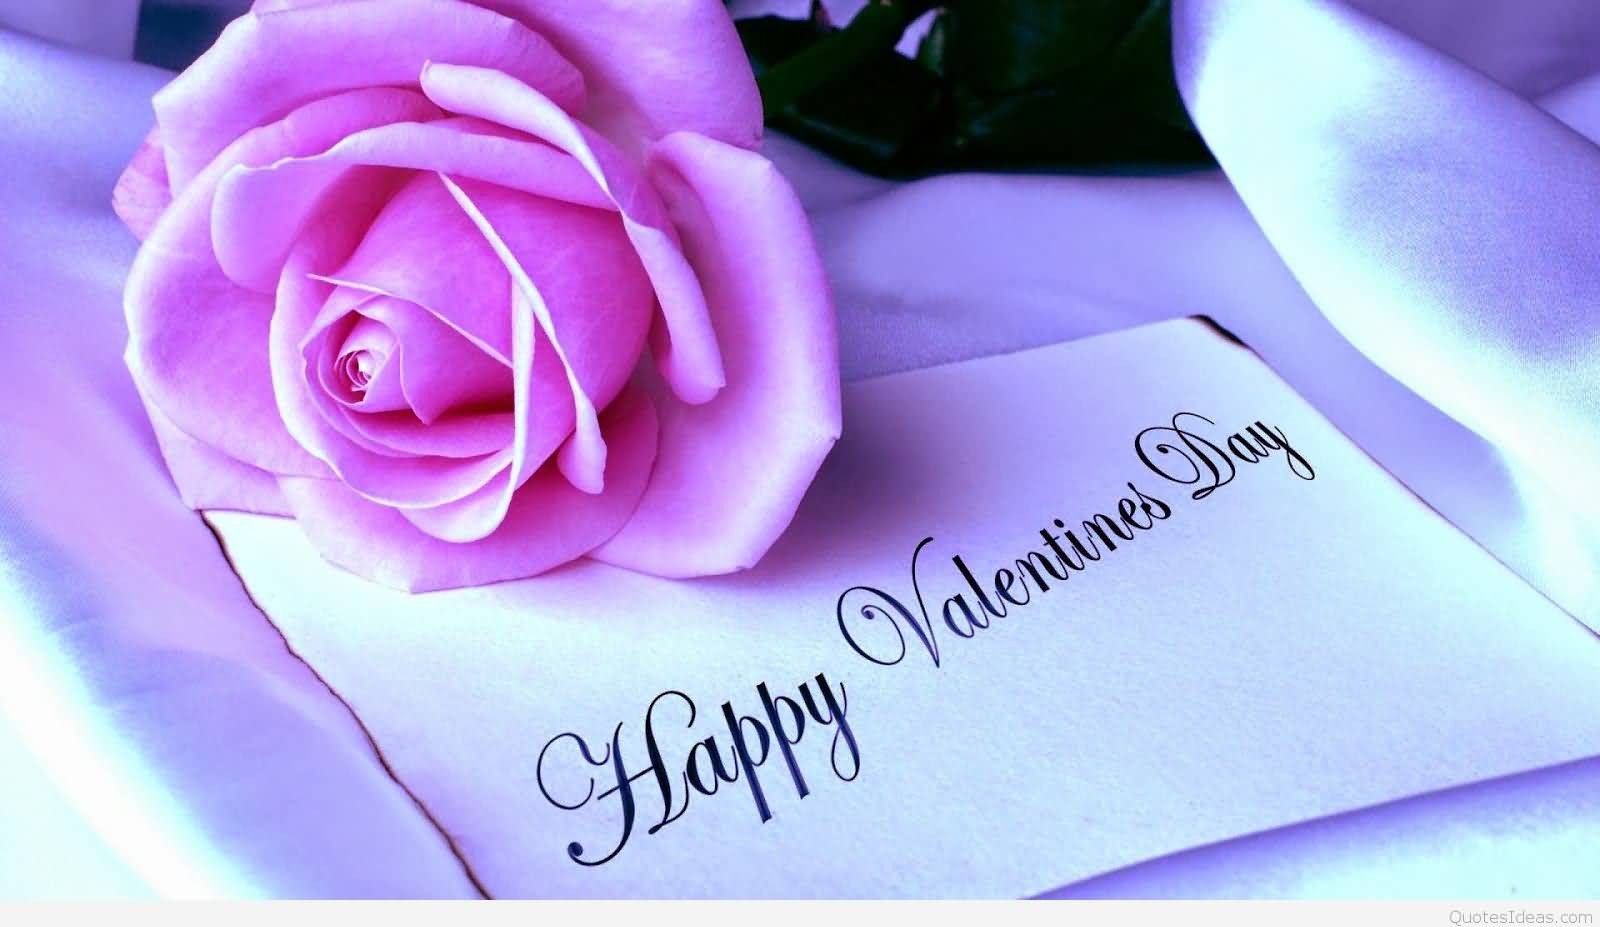 Happy Valentine's Day Note With Pink Rose Greeting Card